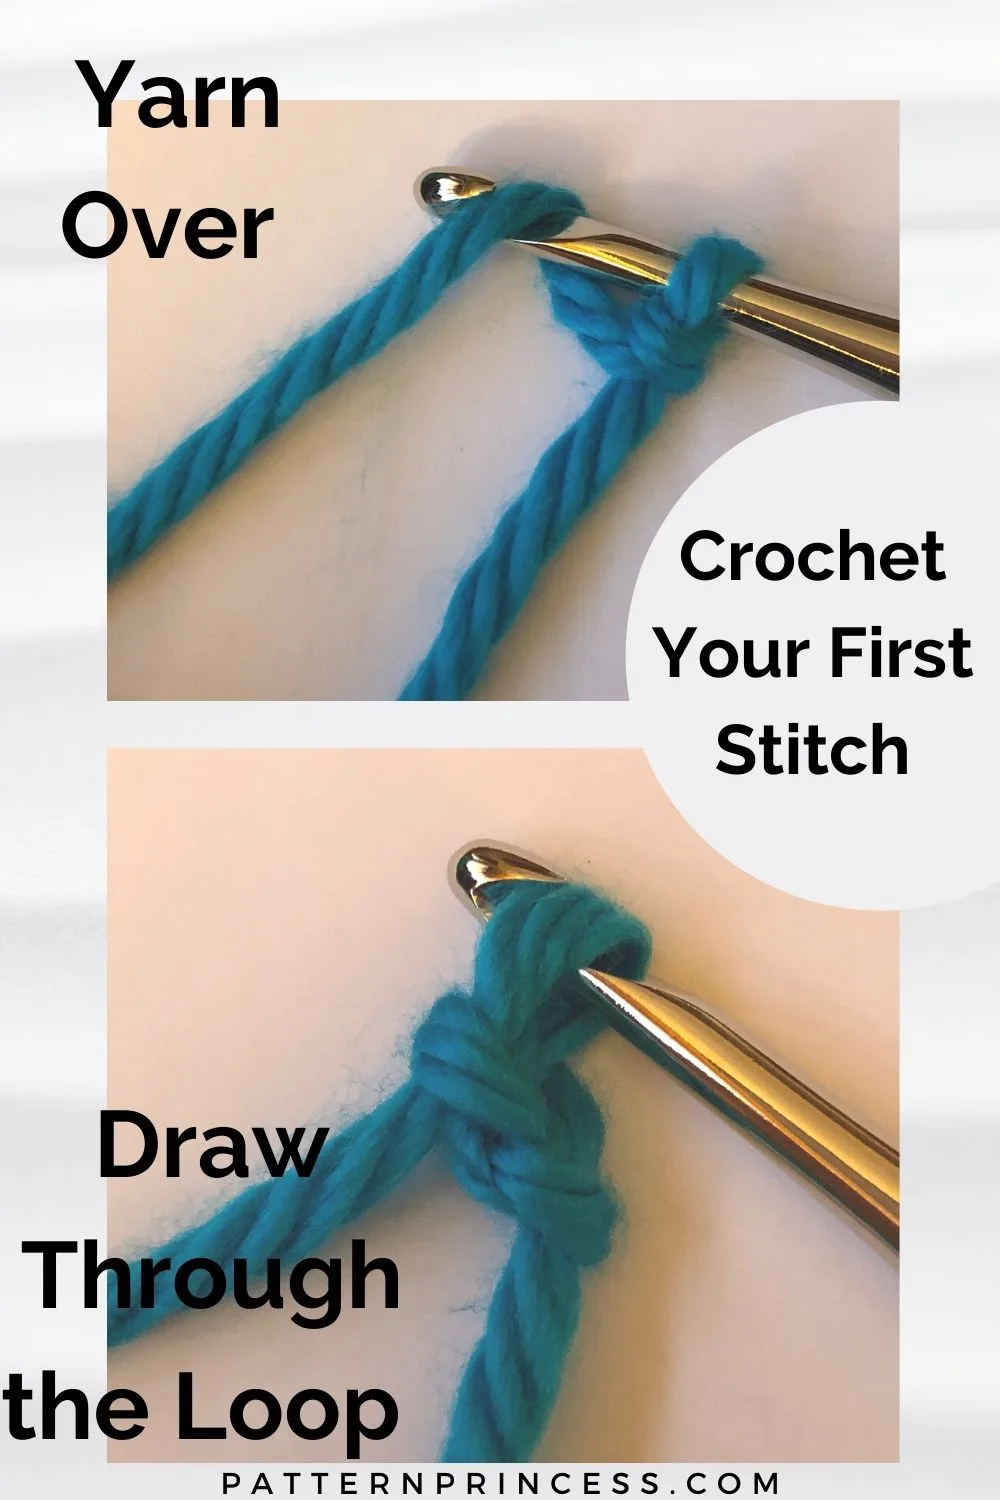 Crochet Your First Stitch